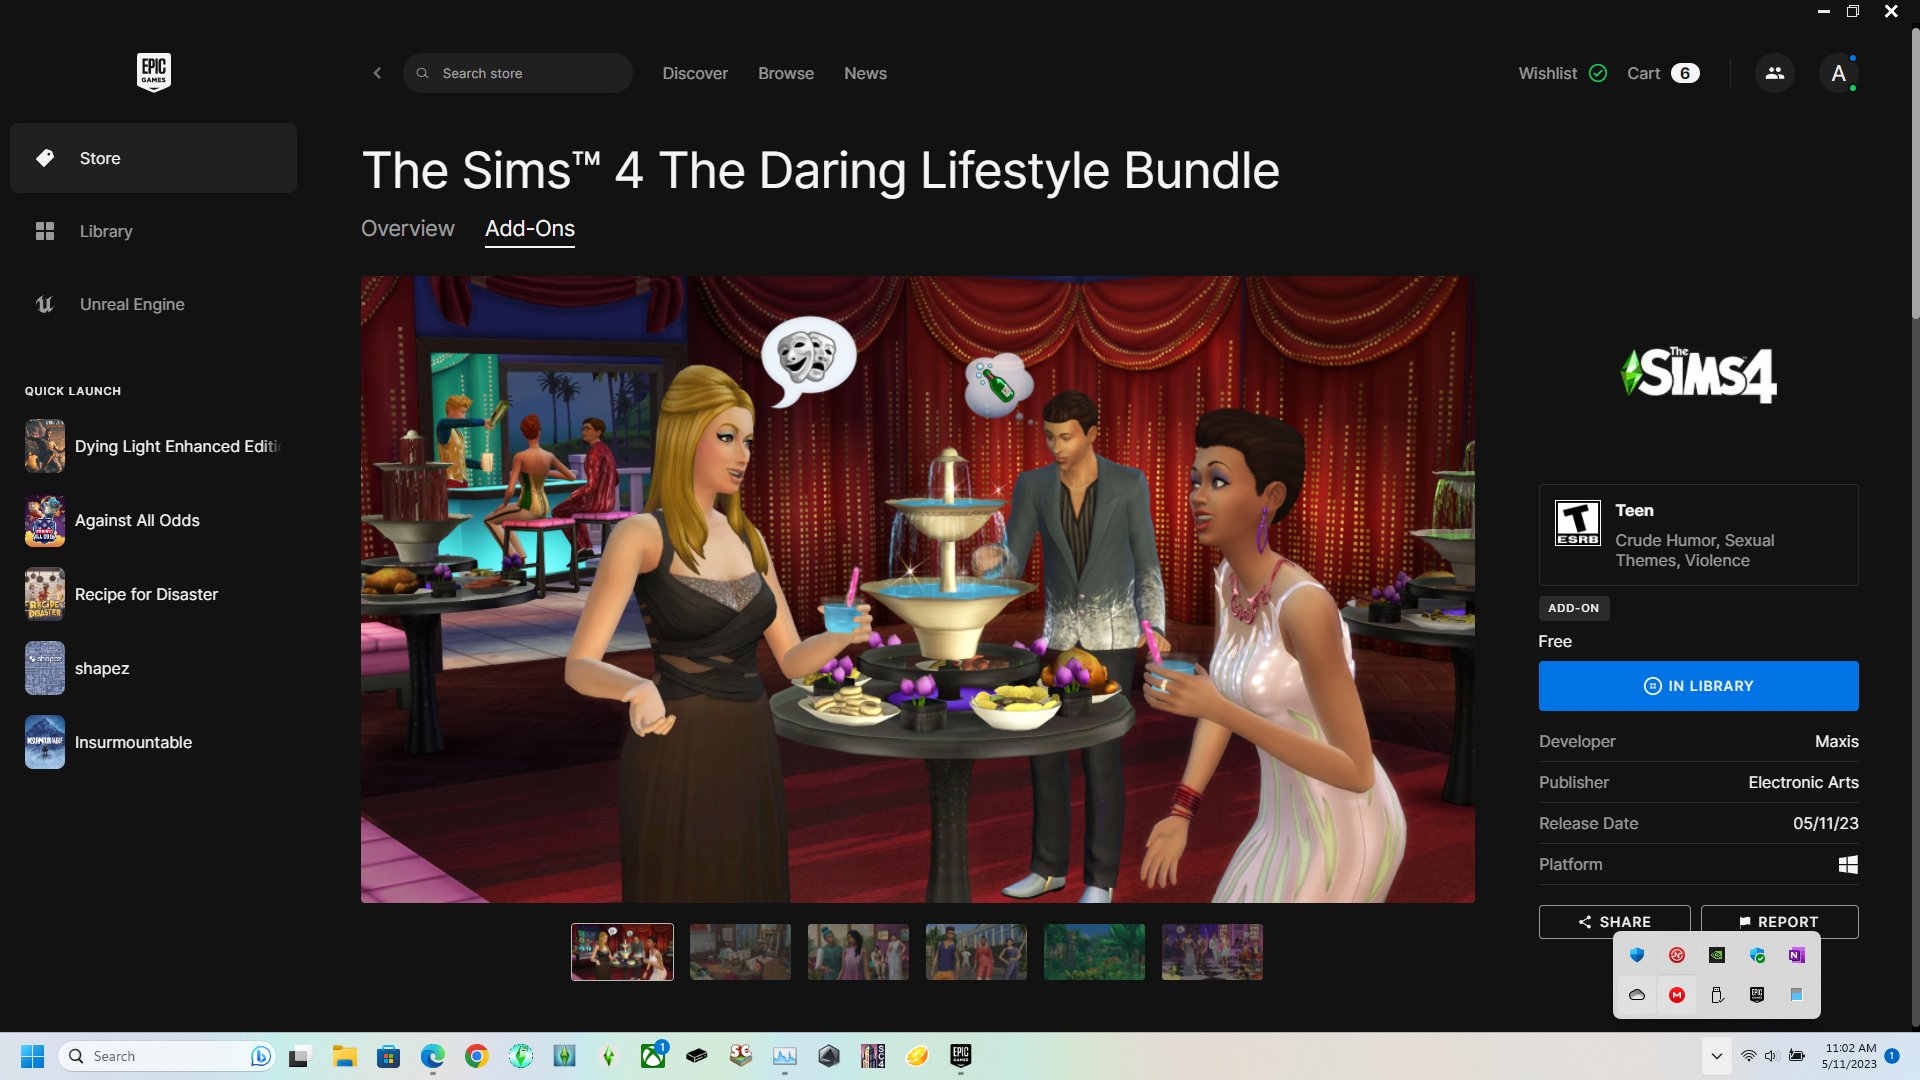 Download The Sims 4 EA App